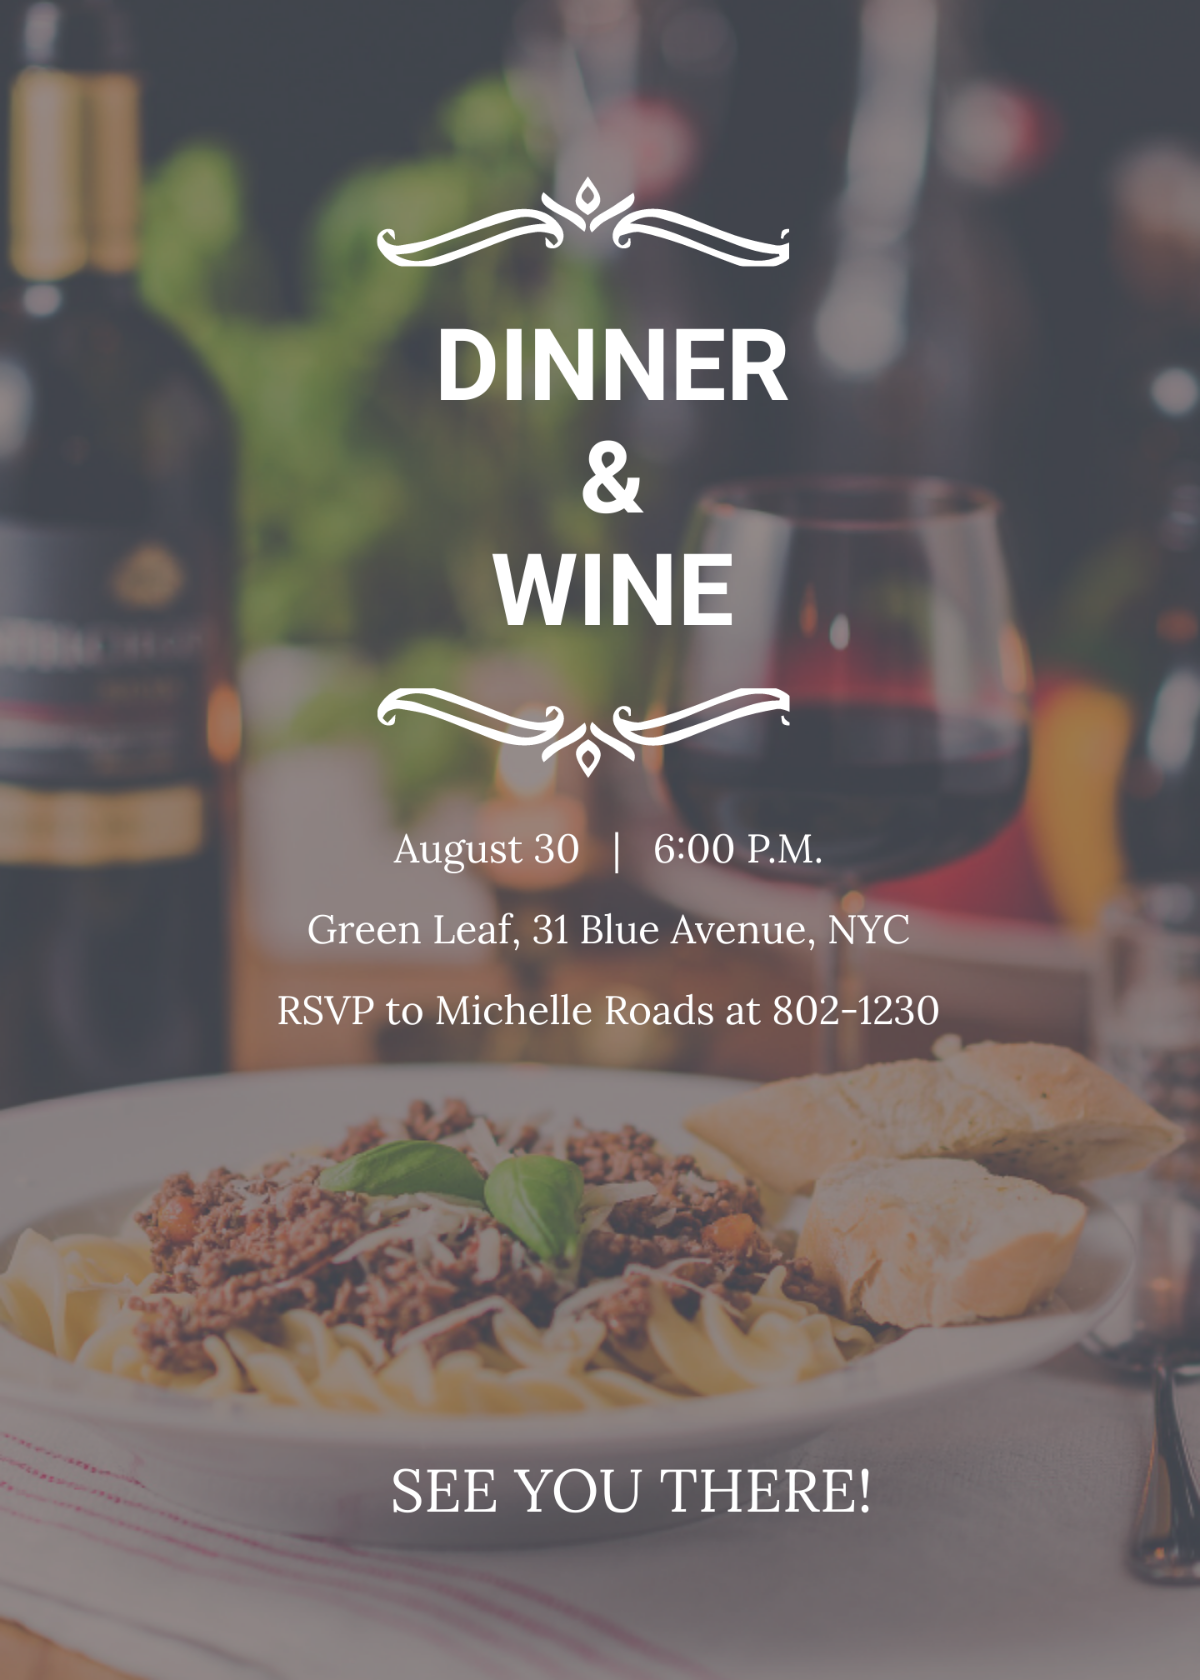 Red Wine and Dinner Invitation Template